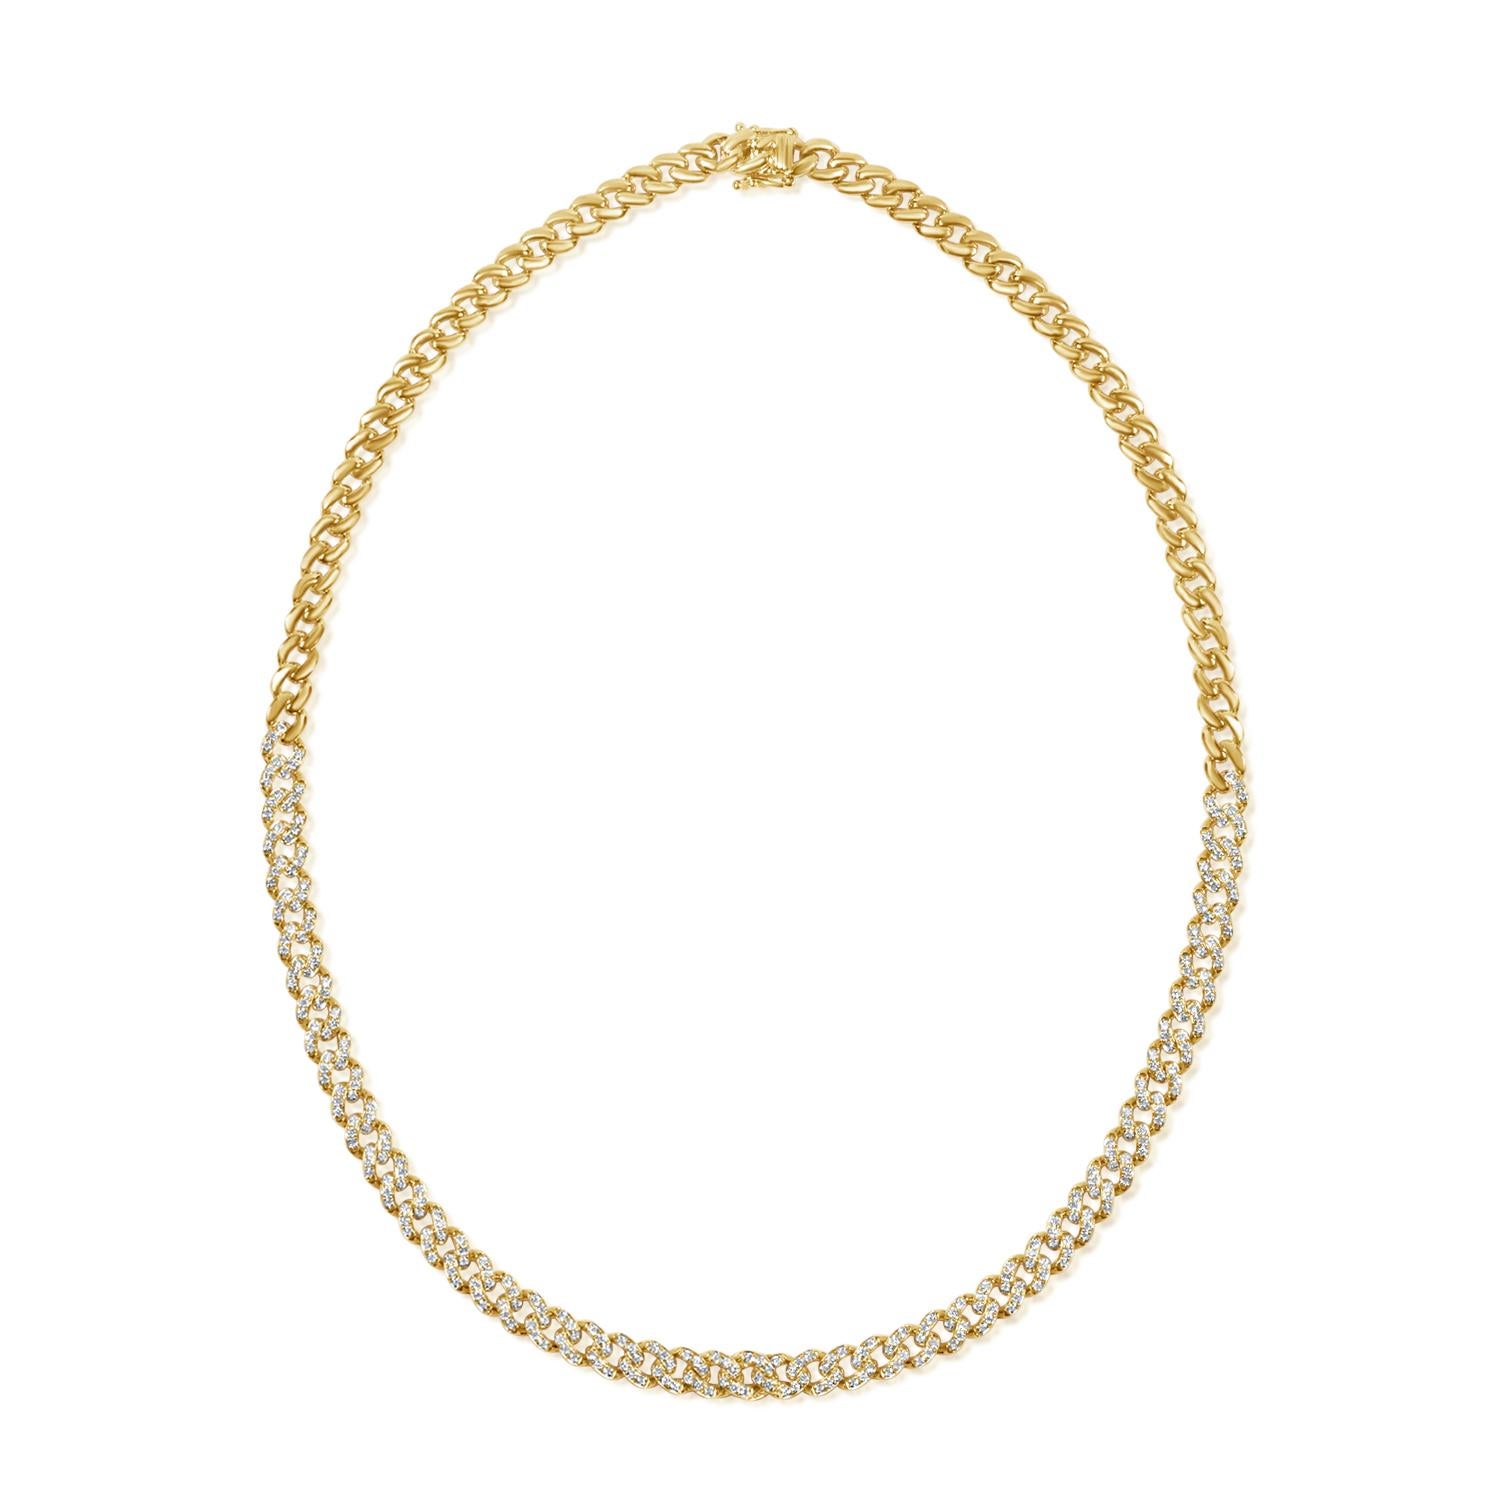 14K GOLD CURB LINK DIAMOND NECKLACE

- Diamond Weight: 1.90 ct.
- Diamond Count: 312
- Gold Weight: 27.07 grams (approx.)
- Necklace Length: 16 inches

This piece is perfect for everyday wear and makes the perfect Gift! 

We certify that this is an